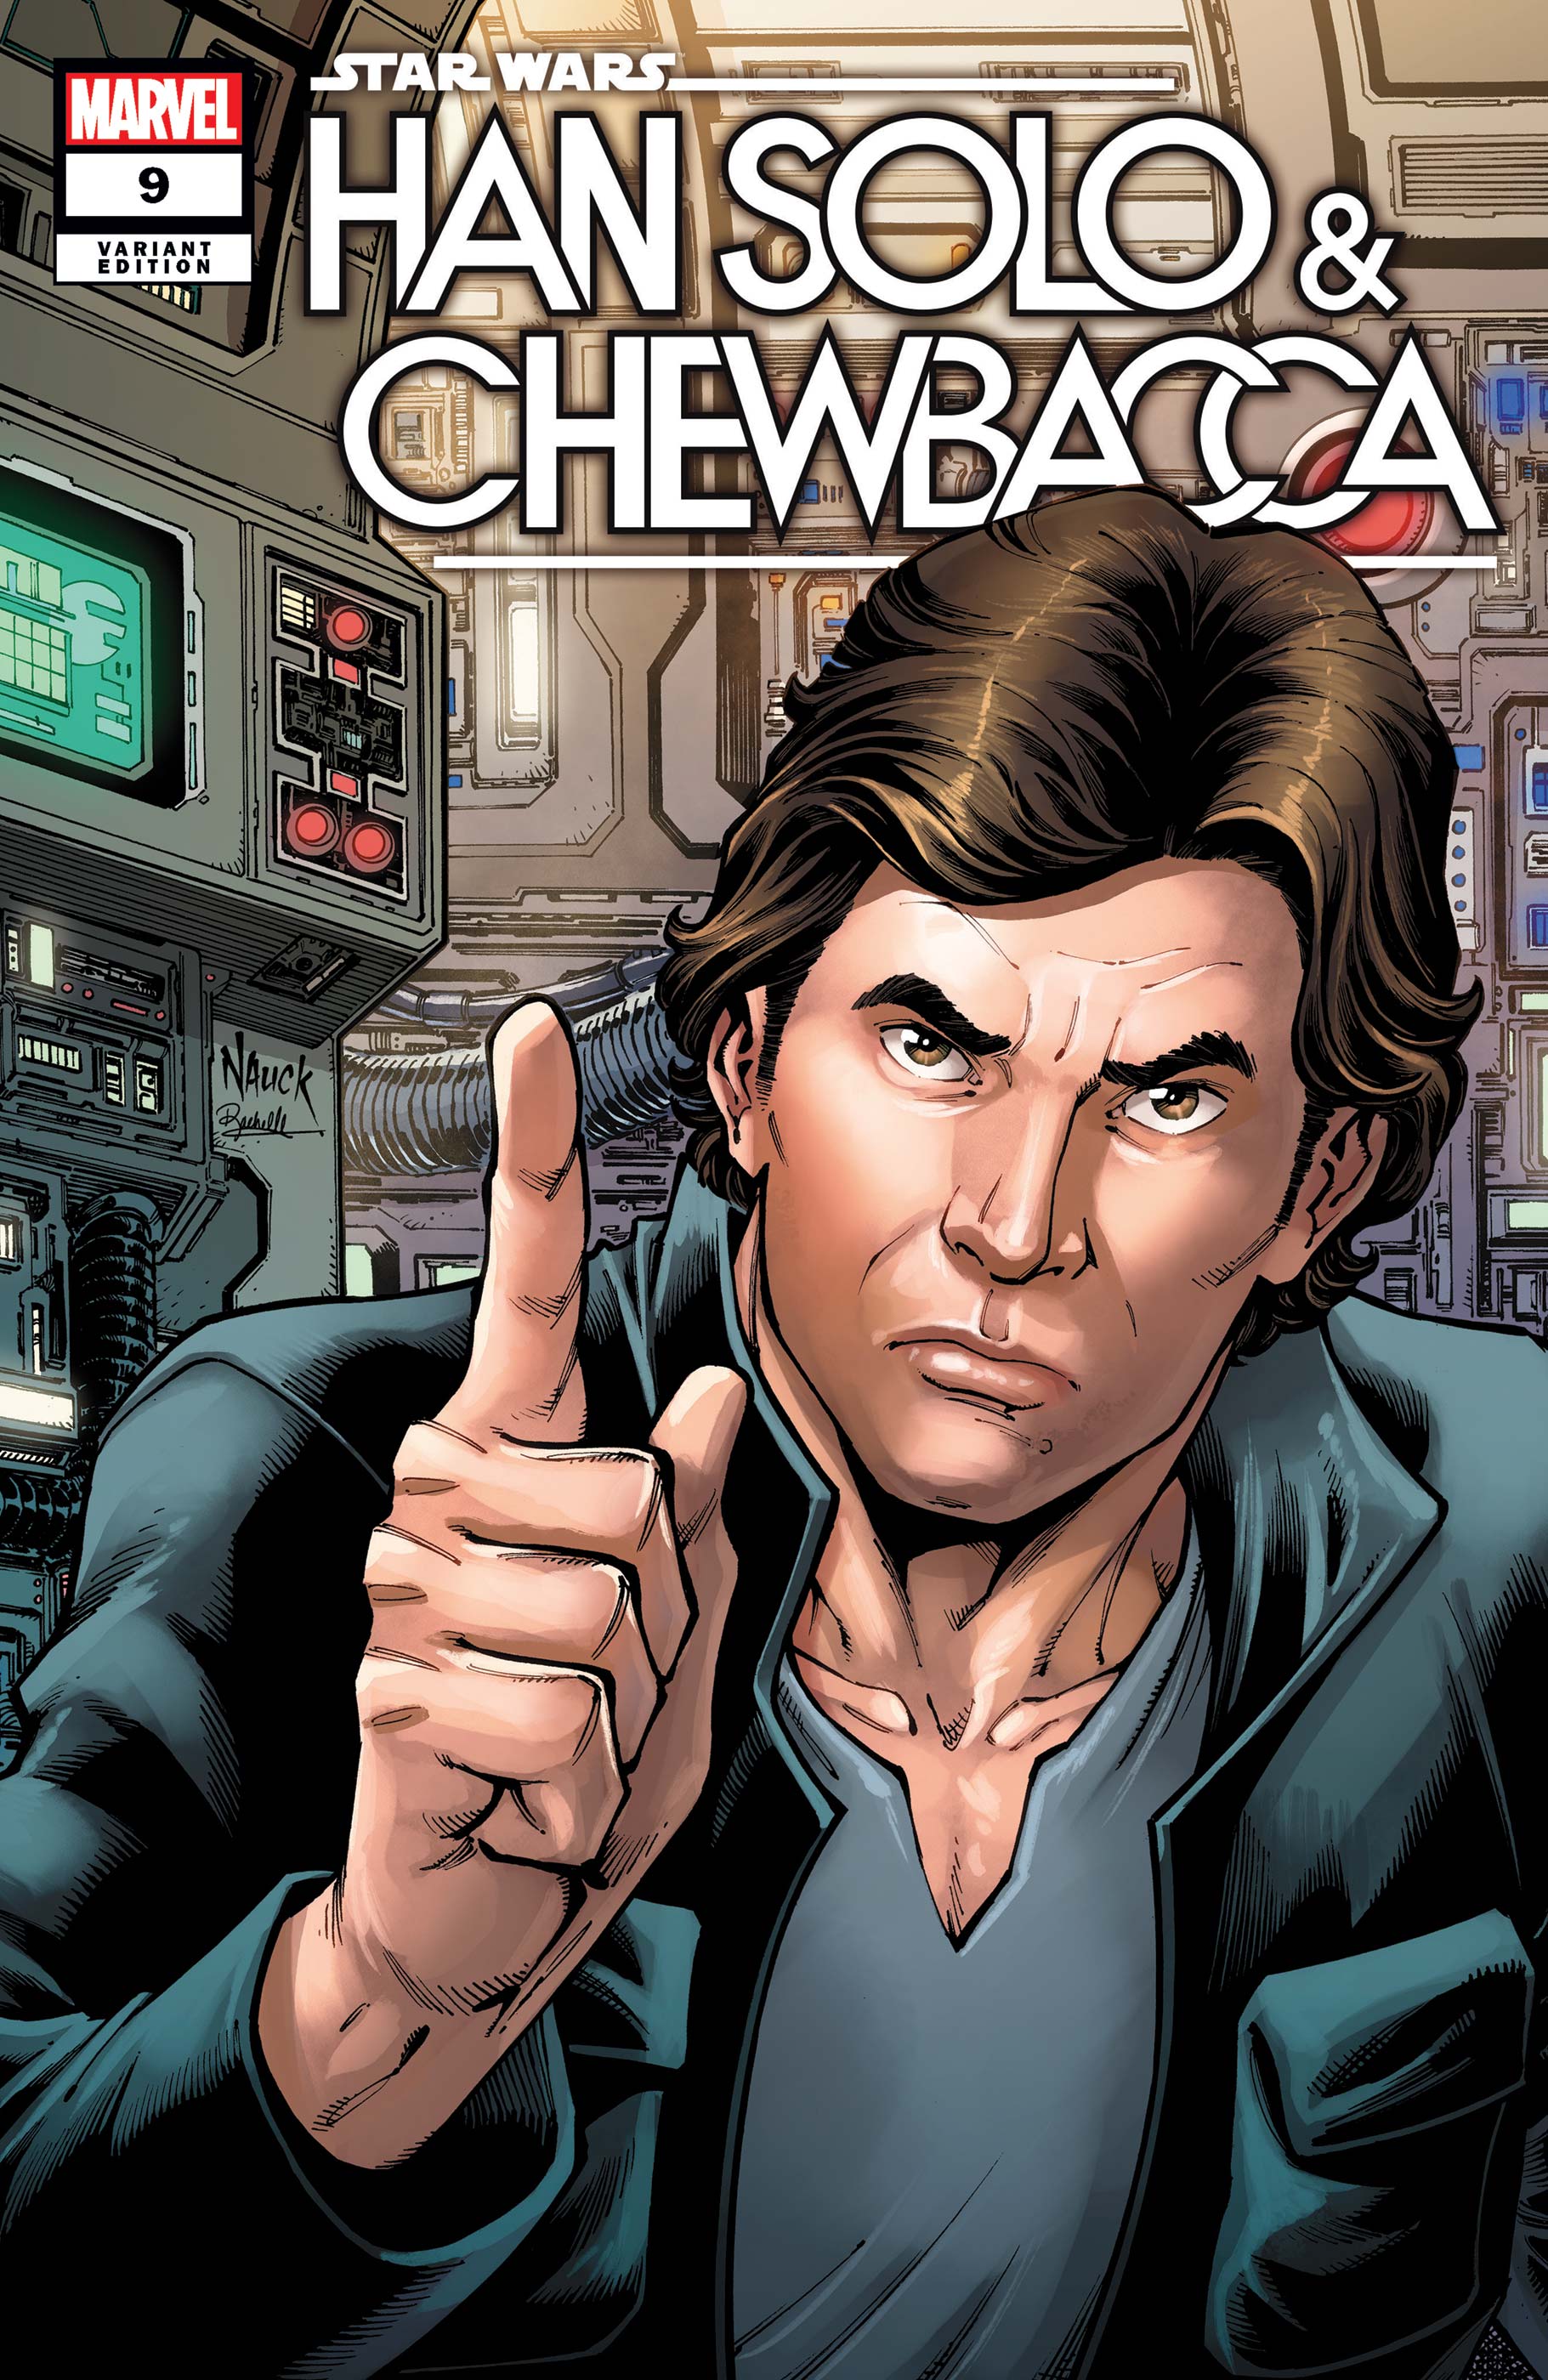 Star Wars: Han Solo & Chewbacca (2022) #9 (Variant)